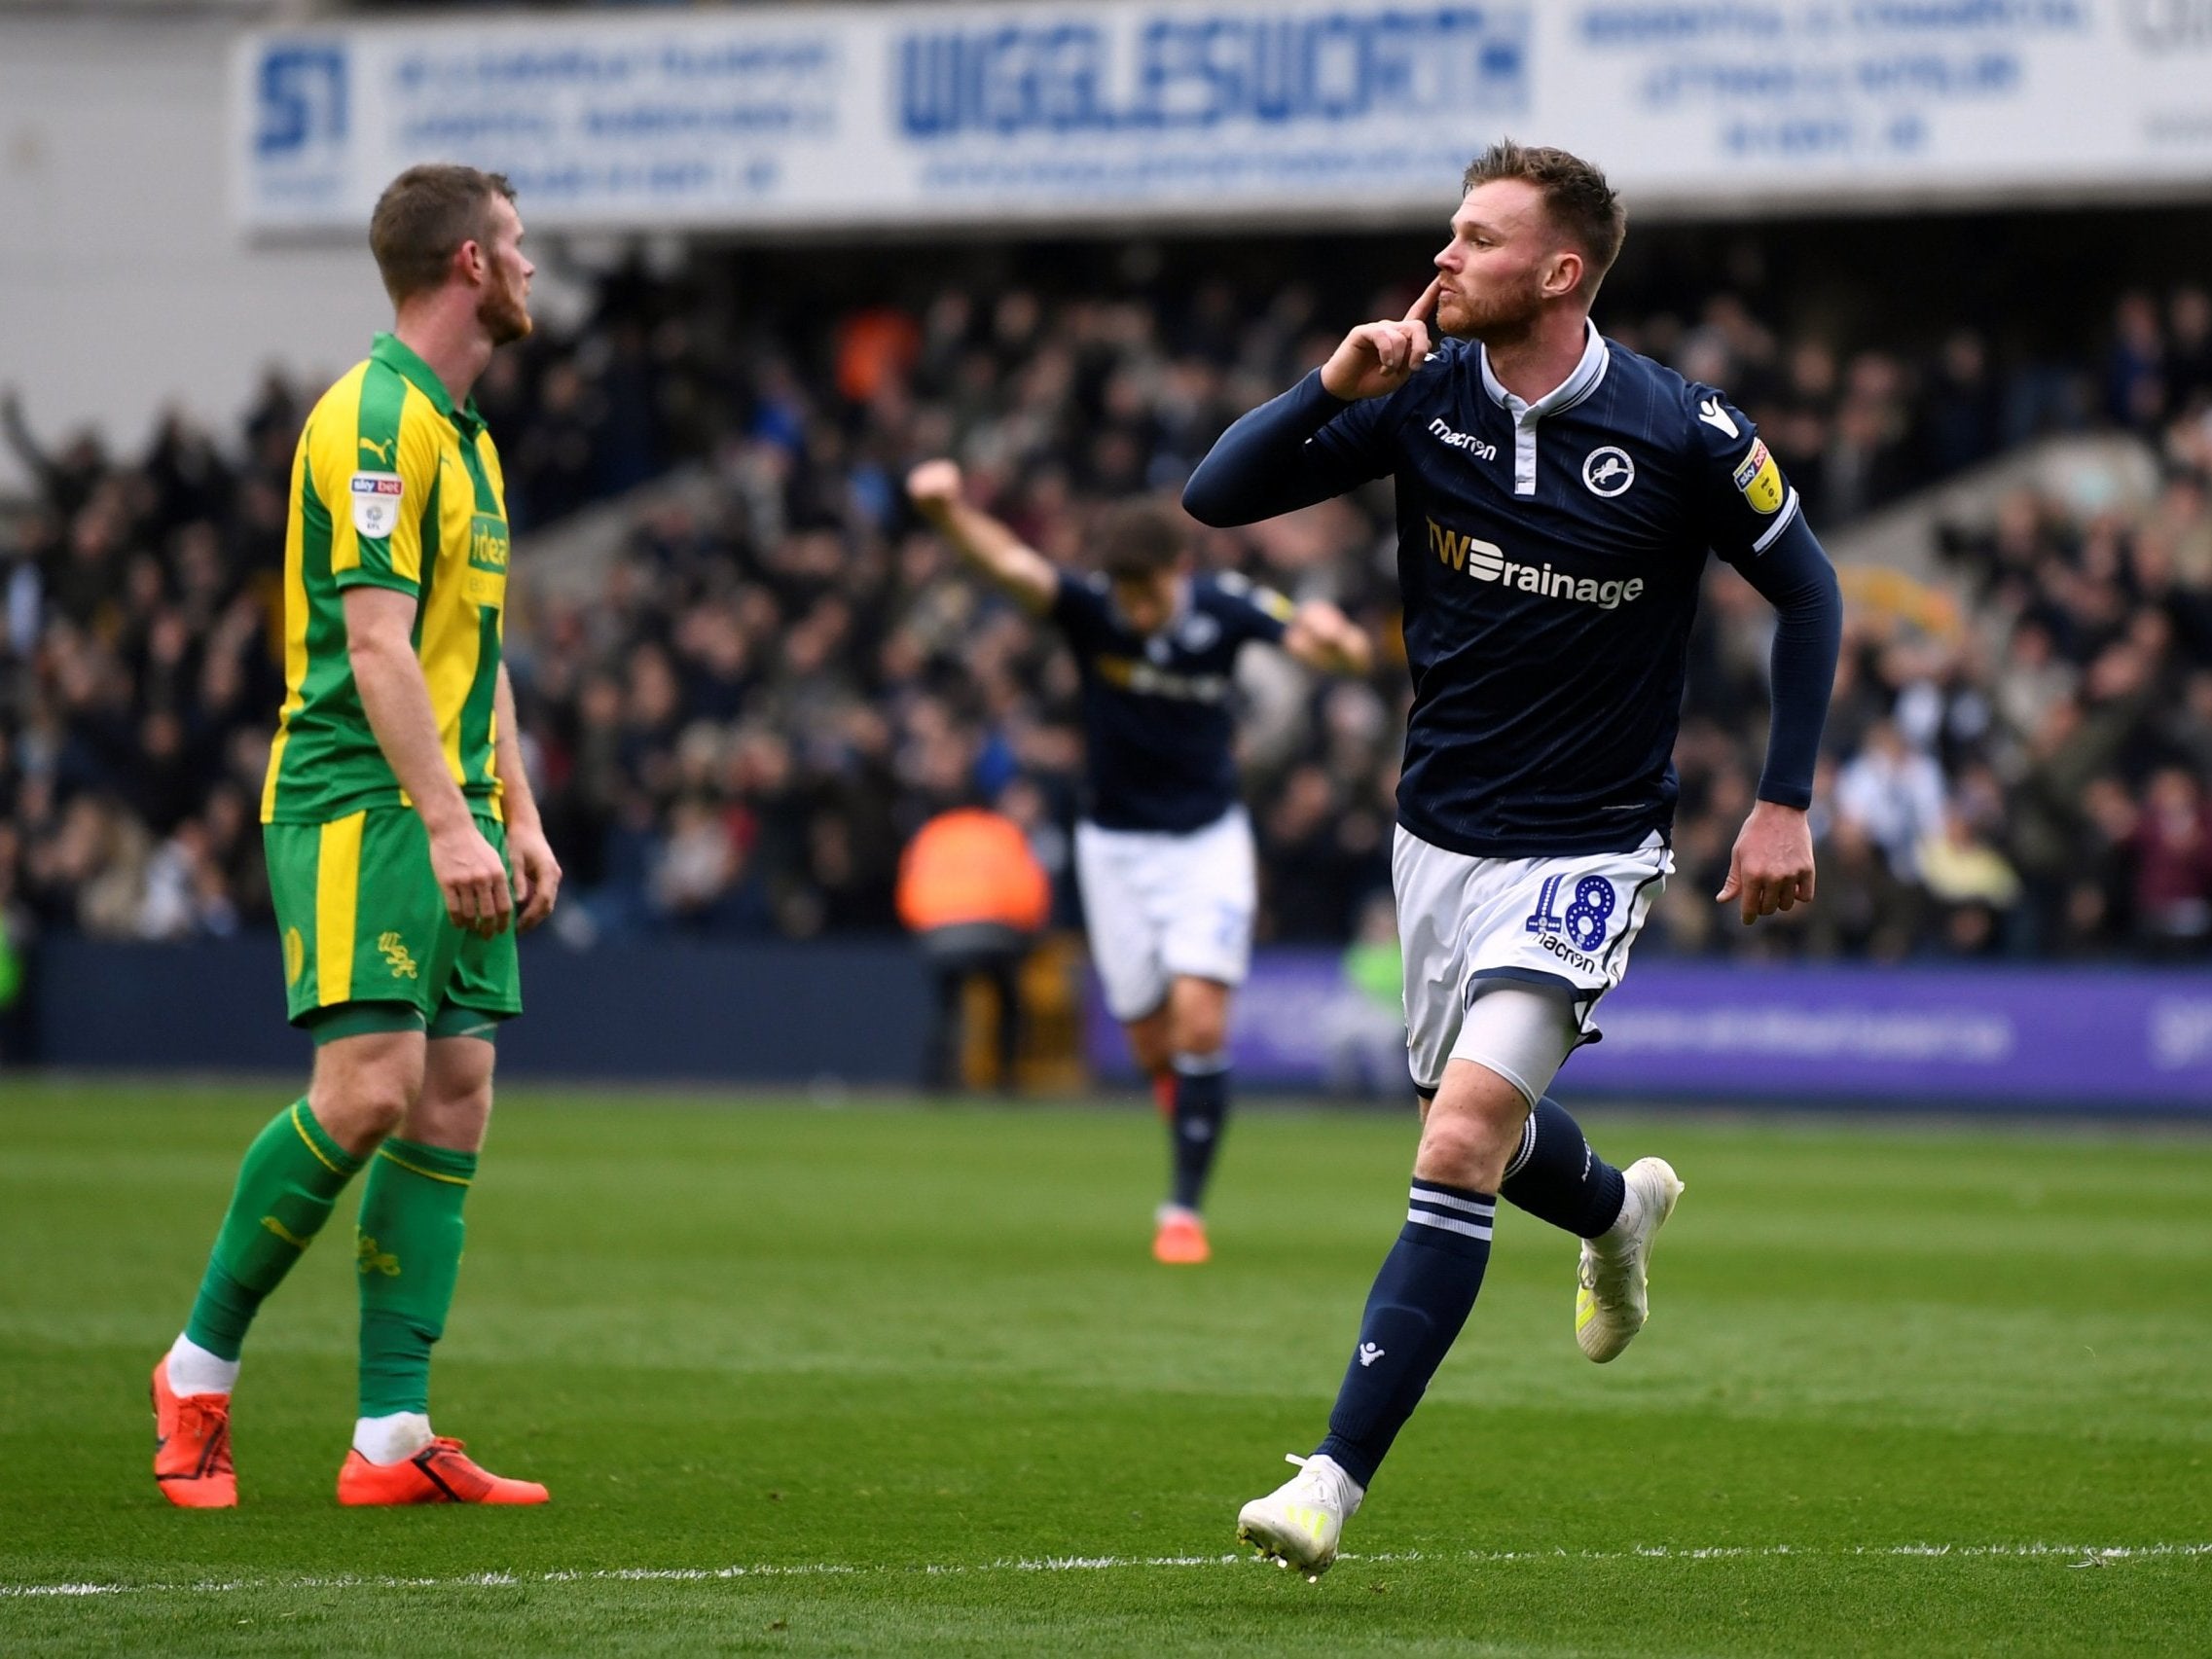 Millwall keep relegation at bay with dominant win over West Brom